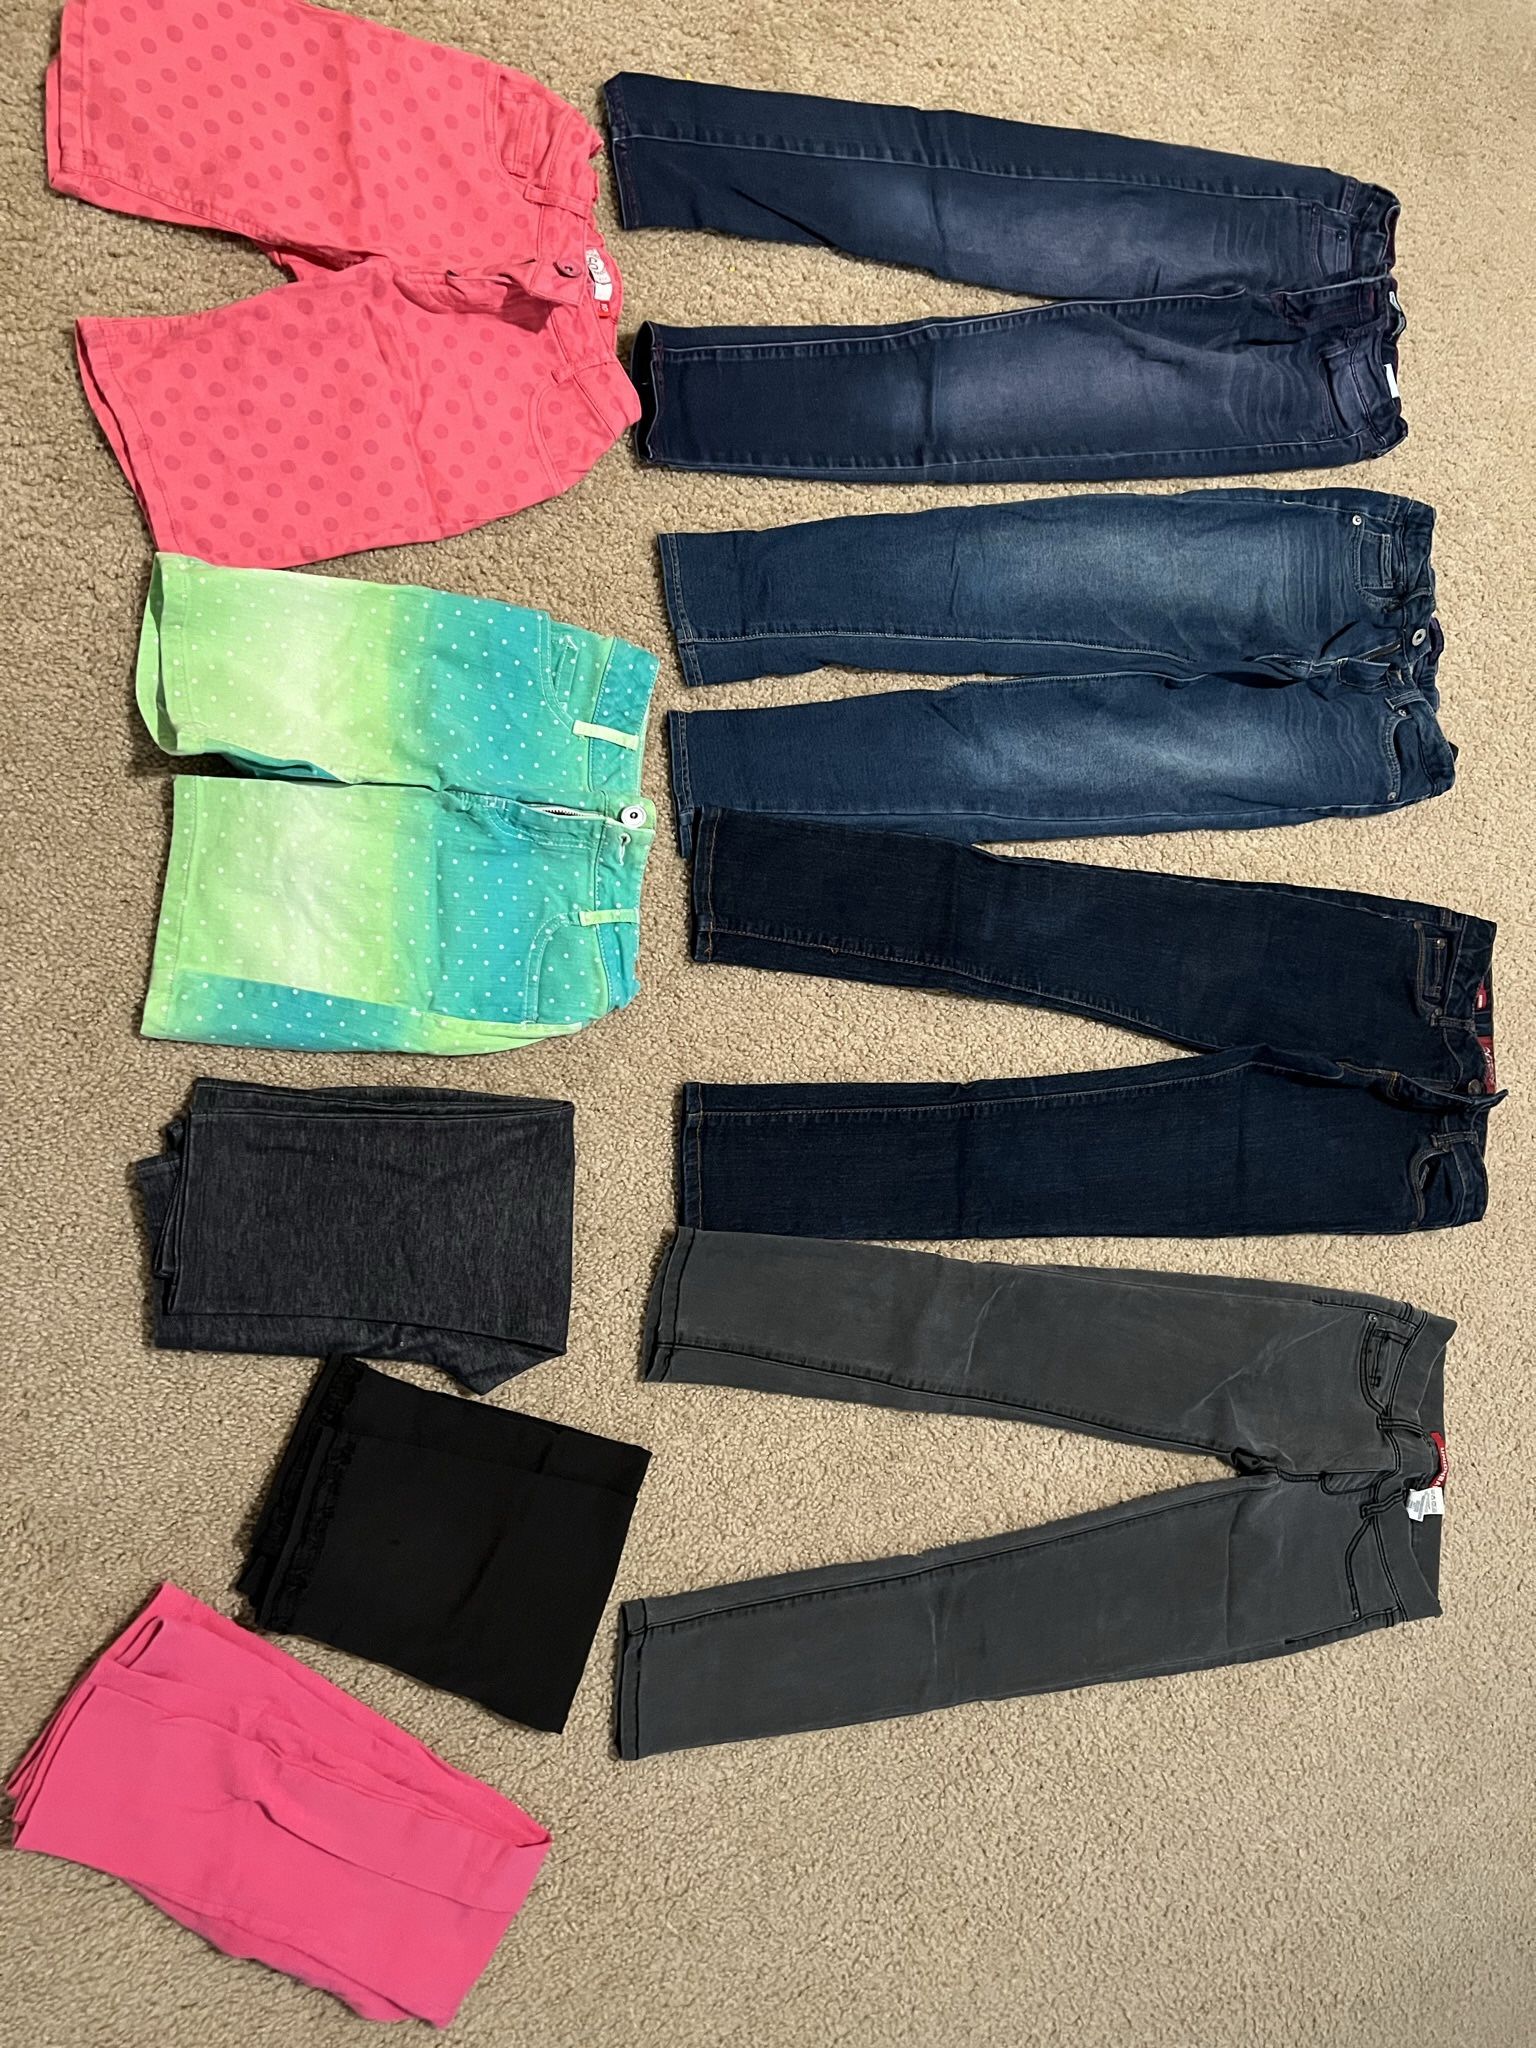 Girls Jeans Leggings- $1 Each,Size 10, All Together-5$